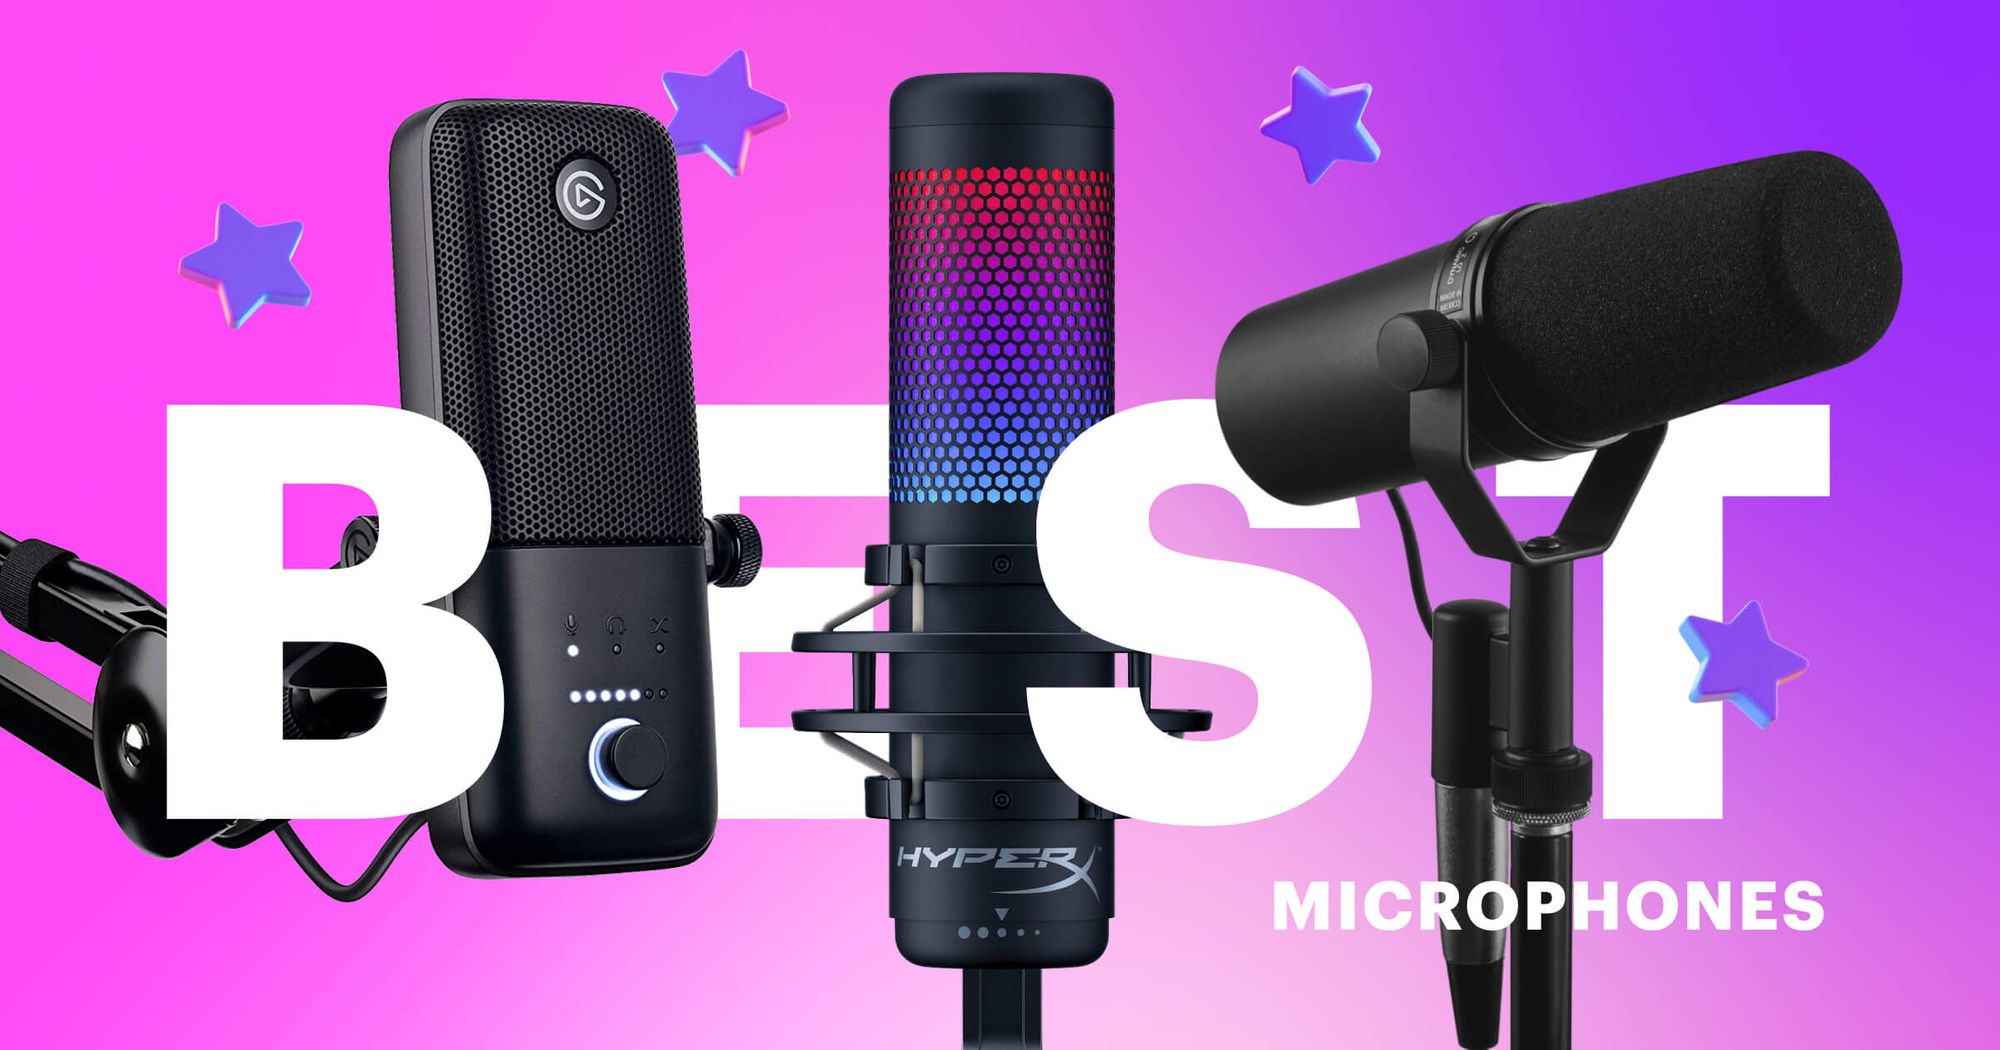 Top 11 microphones for live streaming in 2022